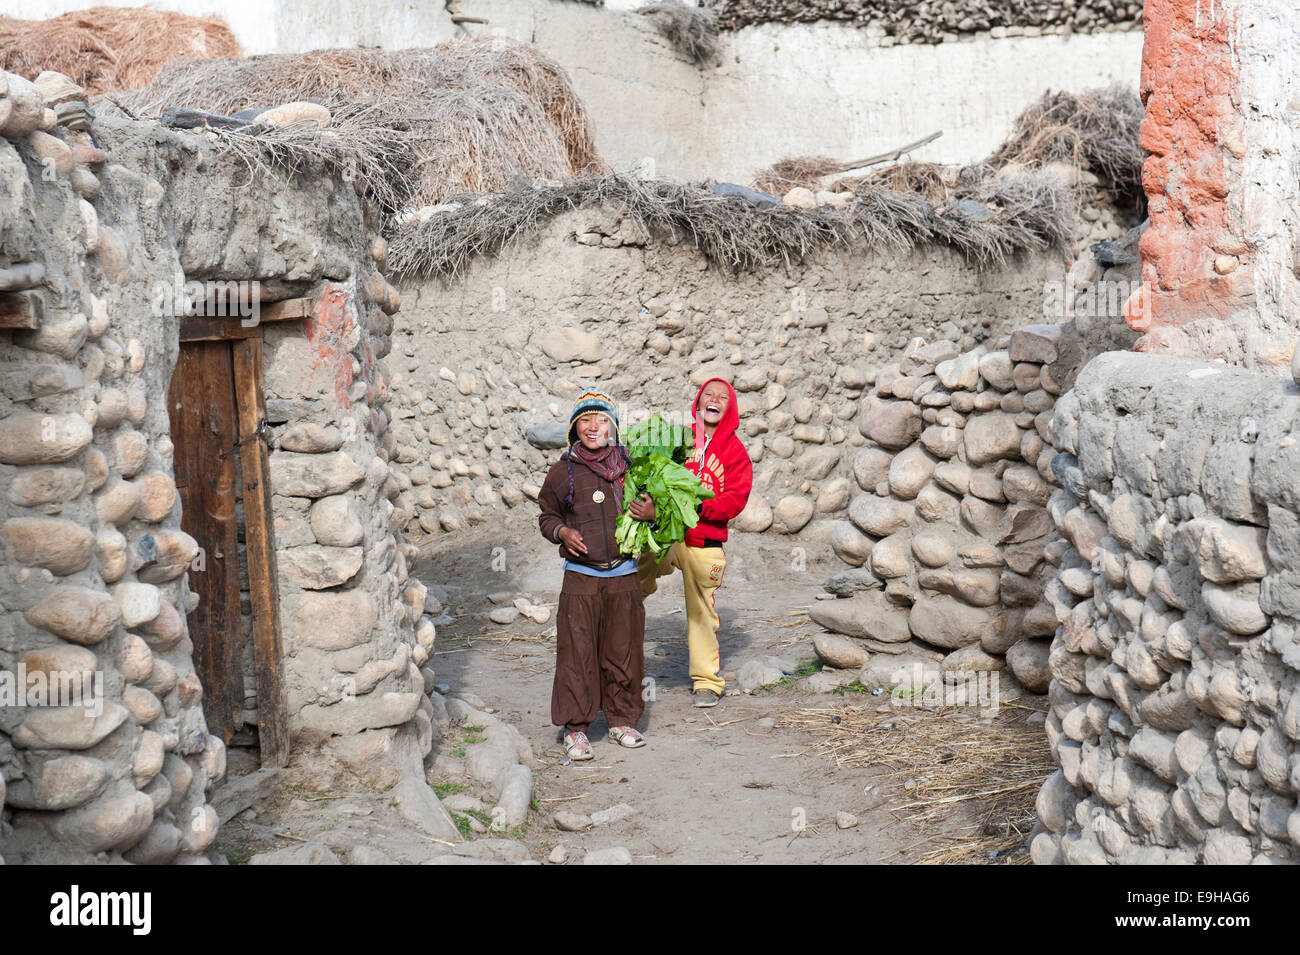 Cheerful children in a village between old walls, ethnic group of Lopa, Charang, Lo or Mustang, Nepal Stock Photo